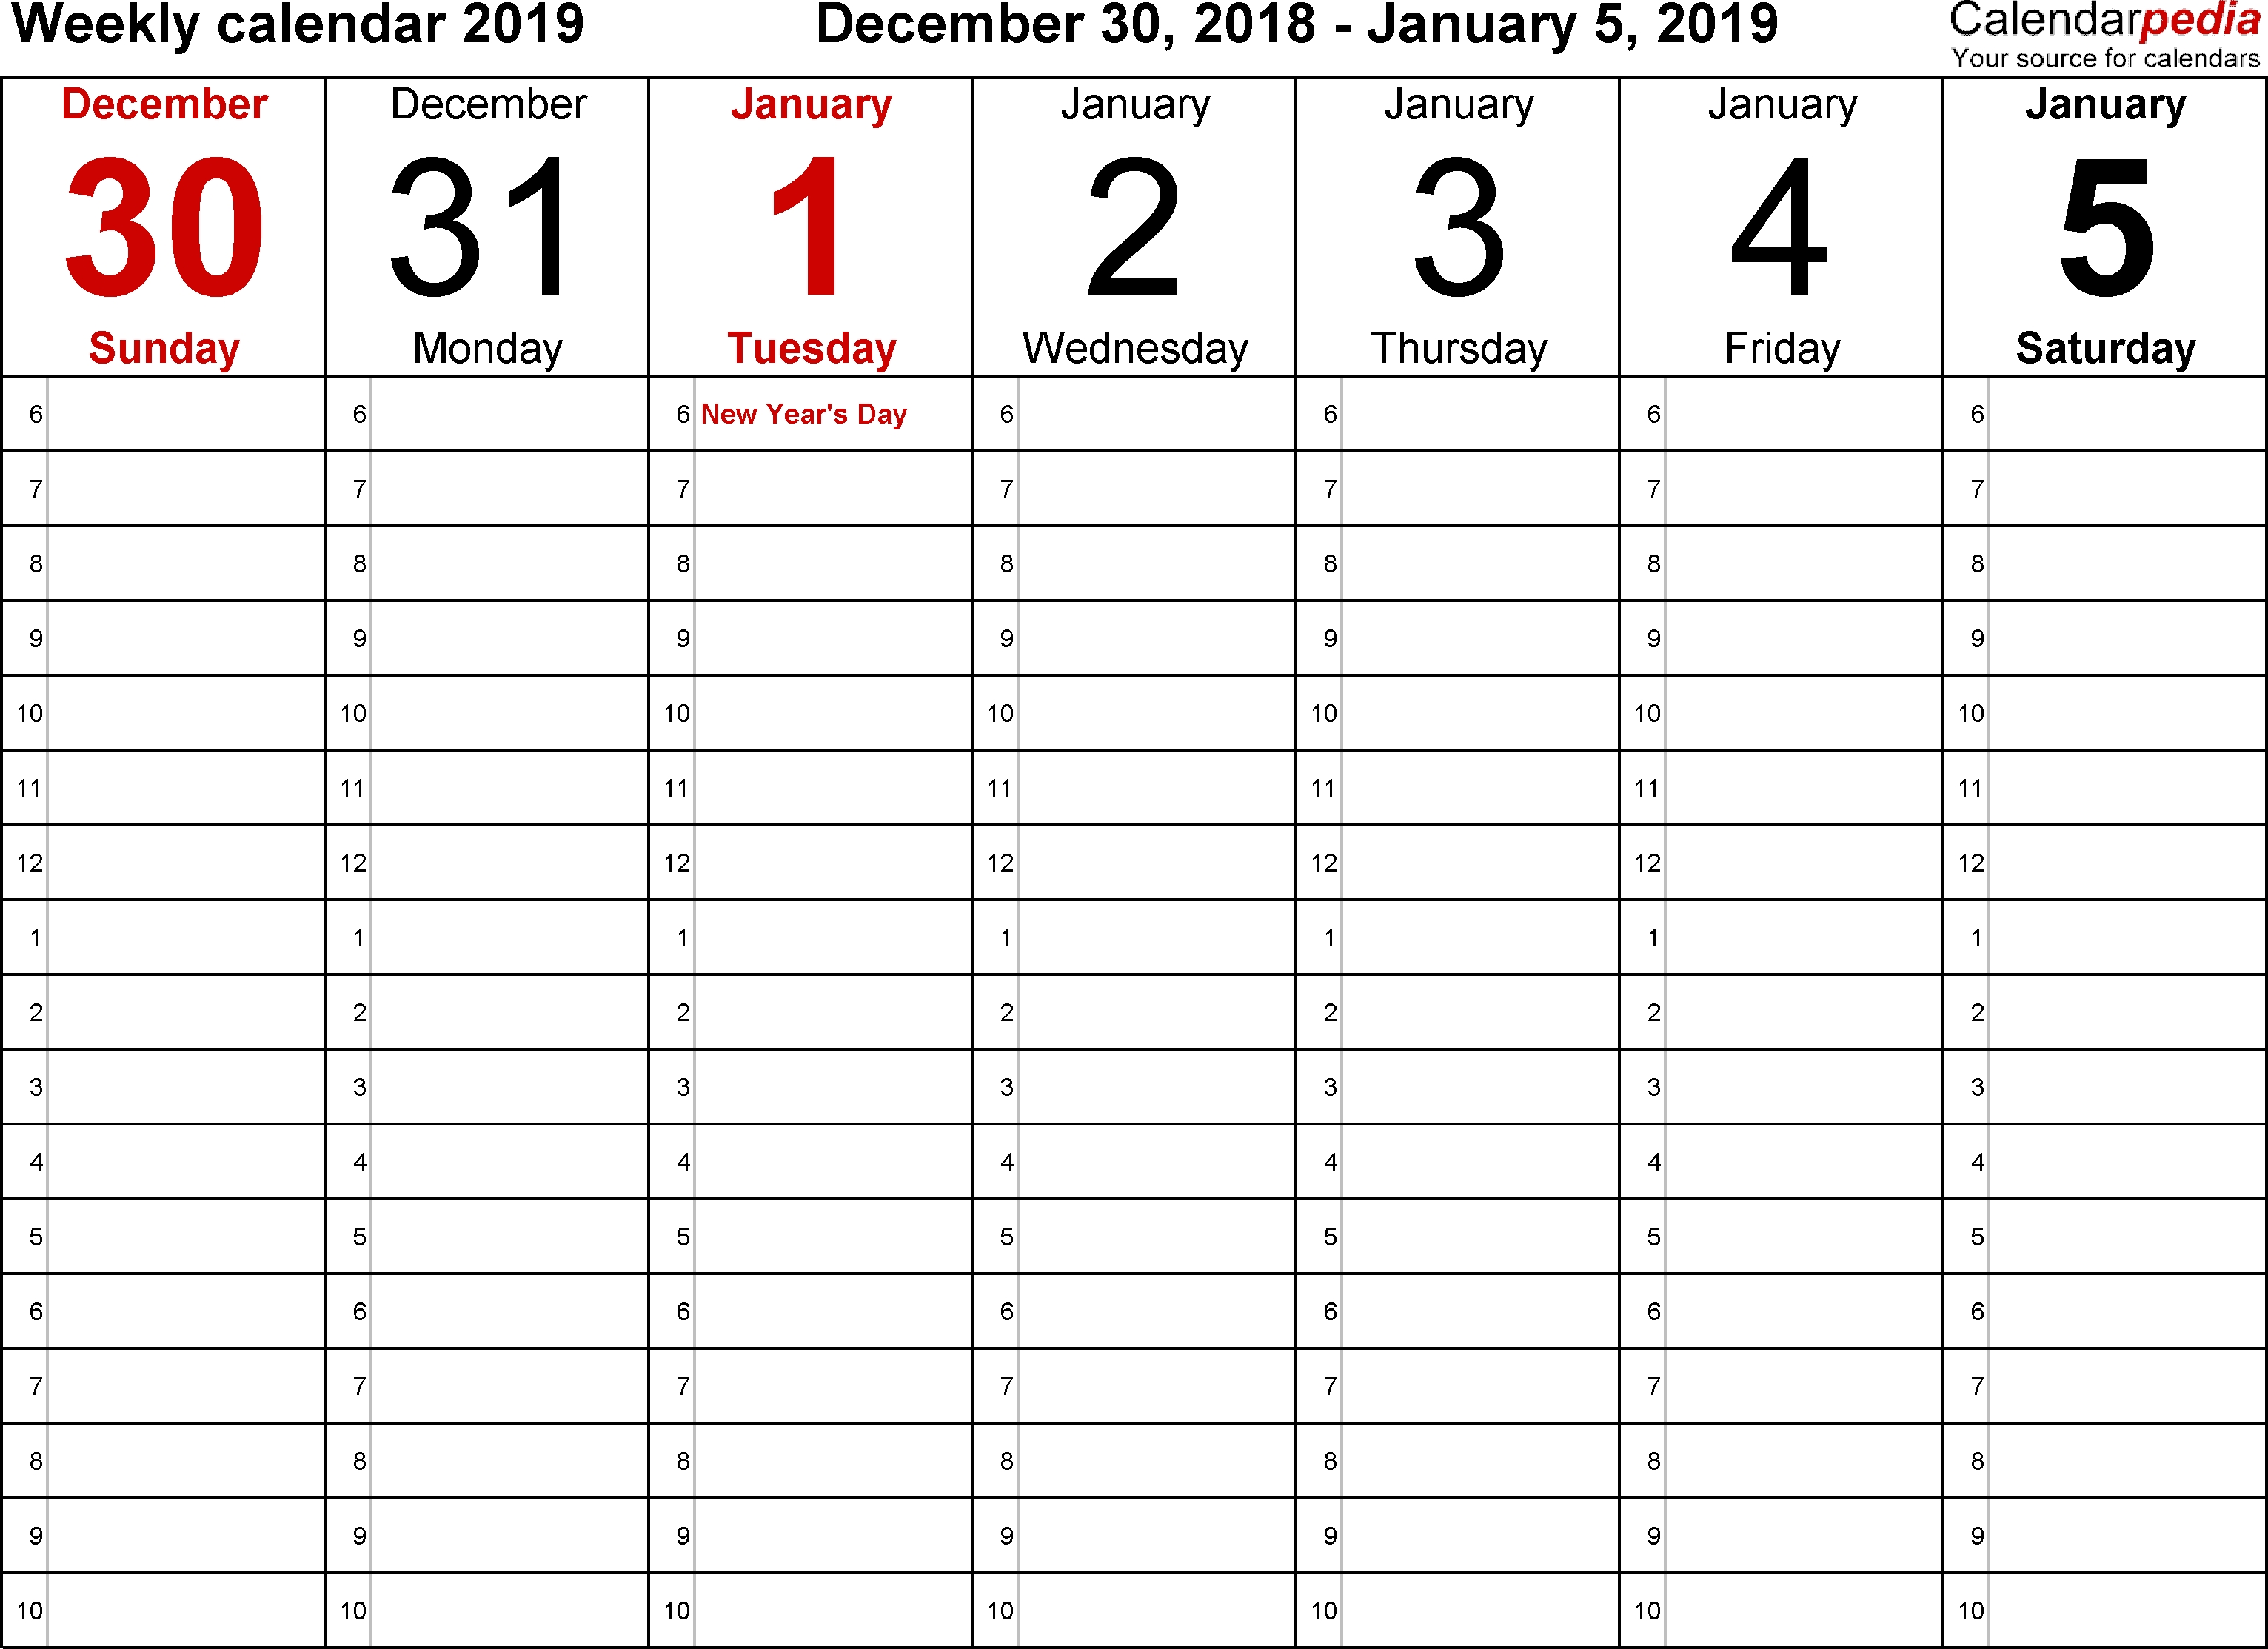 Weekly Calendars 2019 For Excel - 12 Free Printable Templates